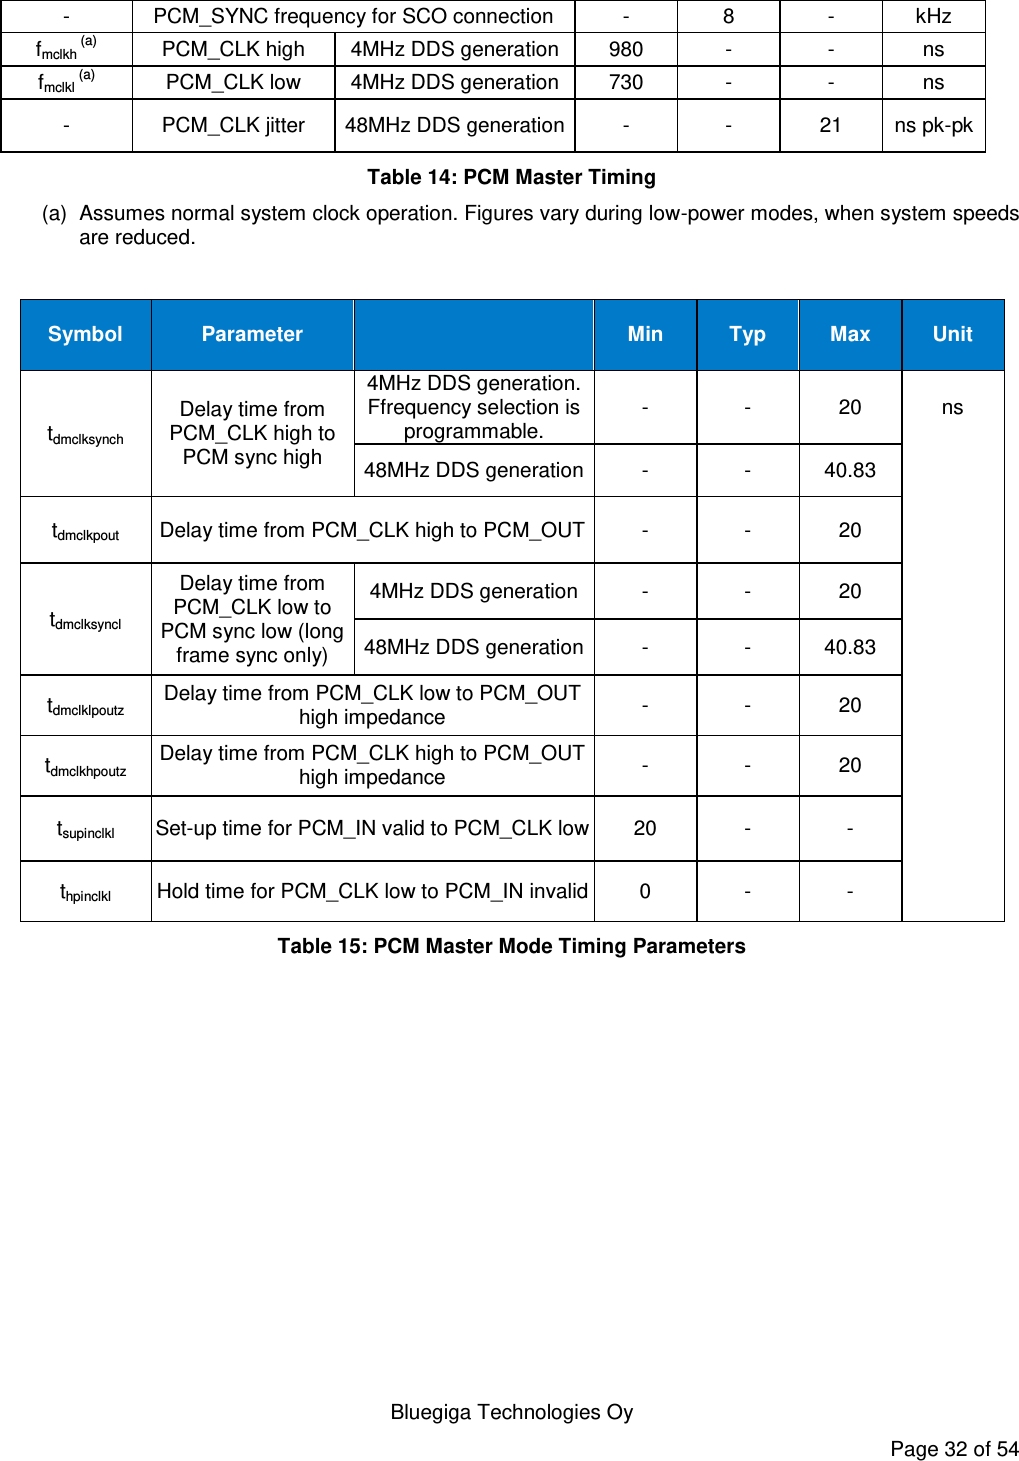    Bluegiga Technologies Oy Page 32 of 54 - PCM_SYNC frequency for SCO connection - 8 - kHz fmclkh (a) PCM_CLK high 4MHz DDS generation 980 - - ns fmclkl (a) PCM_CLK low 4MHz DDS generation 730 - - ns - PCM_CLK jitter 48MHz DDS generation - - 21 ns pk-pk Table 14: PCM Master Timing (a)  Assumes normal system clock operation. Figures vary during low-power modes, when system speeds are reduced.  Symbol Parameter  Min Typ Max Unit tdmclksynch Delay time from PCM_CLK high to PCM sync high 4MHz DDS generation. Ffrequency selection is programmable. - - 20 ns 48MHz DDS generation - - 40.83  tdmclkpout Delay time from PCM_CLK high to PCM_OUT - - 20  tdmclksyncl Delay time from PCM_CLK low to PCM sync low (long frame sync only) 4MHz DDS generation - - 20  48MHz DDS generation - - 40.83  tdmclklpoutz Delay time from PCM_CLK low to PCM_OUT high impedance - - 20  tdmclkhpoutz Delay time from PCM_CLK high to PCM_OUT high impedance - - 20  tsupinclkl Set-up time for PCM_IN valid to PCM_CLK low 20 - -  thpinclkl Hold time for PCM_CLK low to PCM_IN invalid 0 - -  Table 15: PCM Master Mode Timing Parameters  